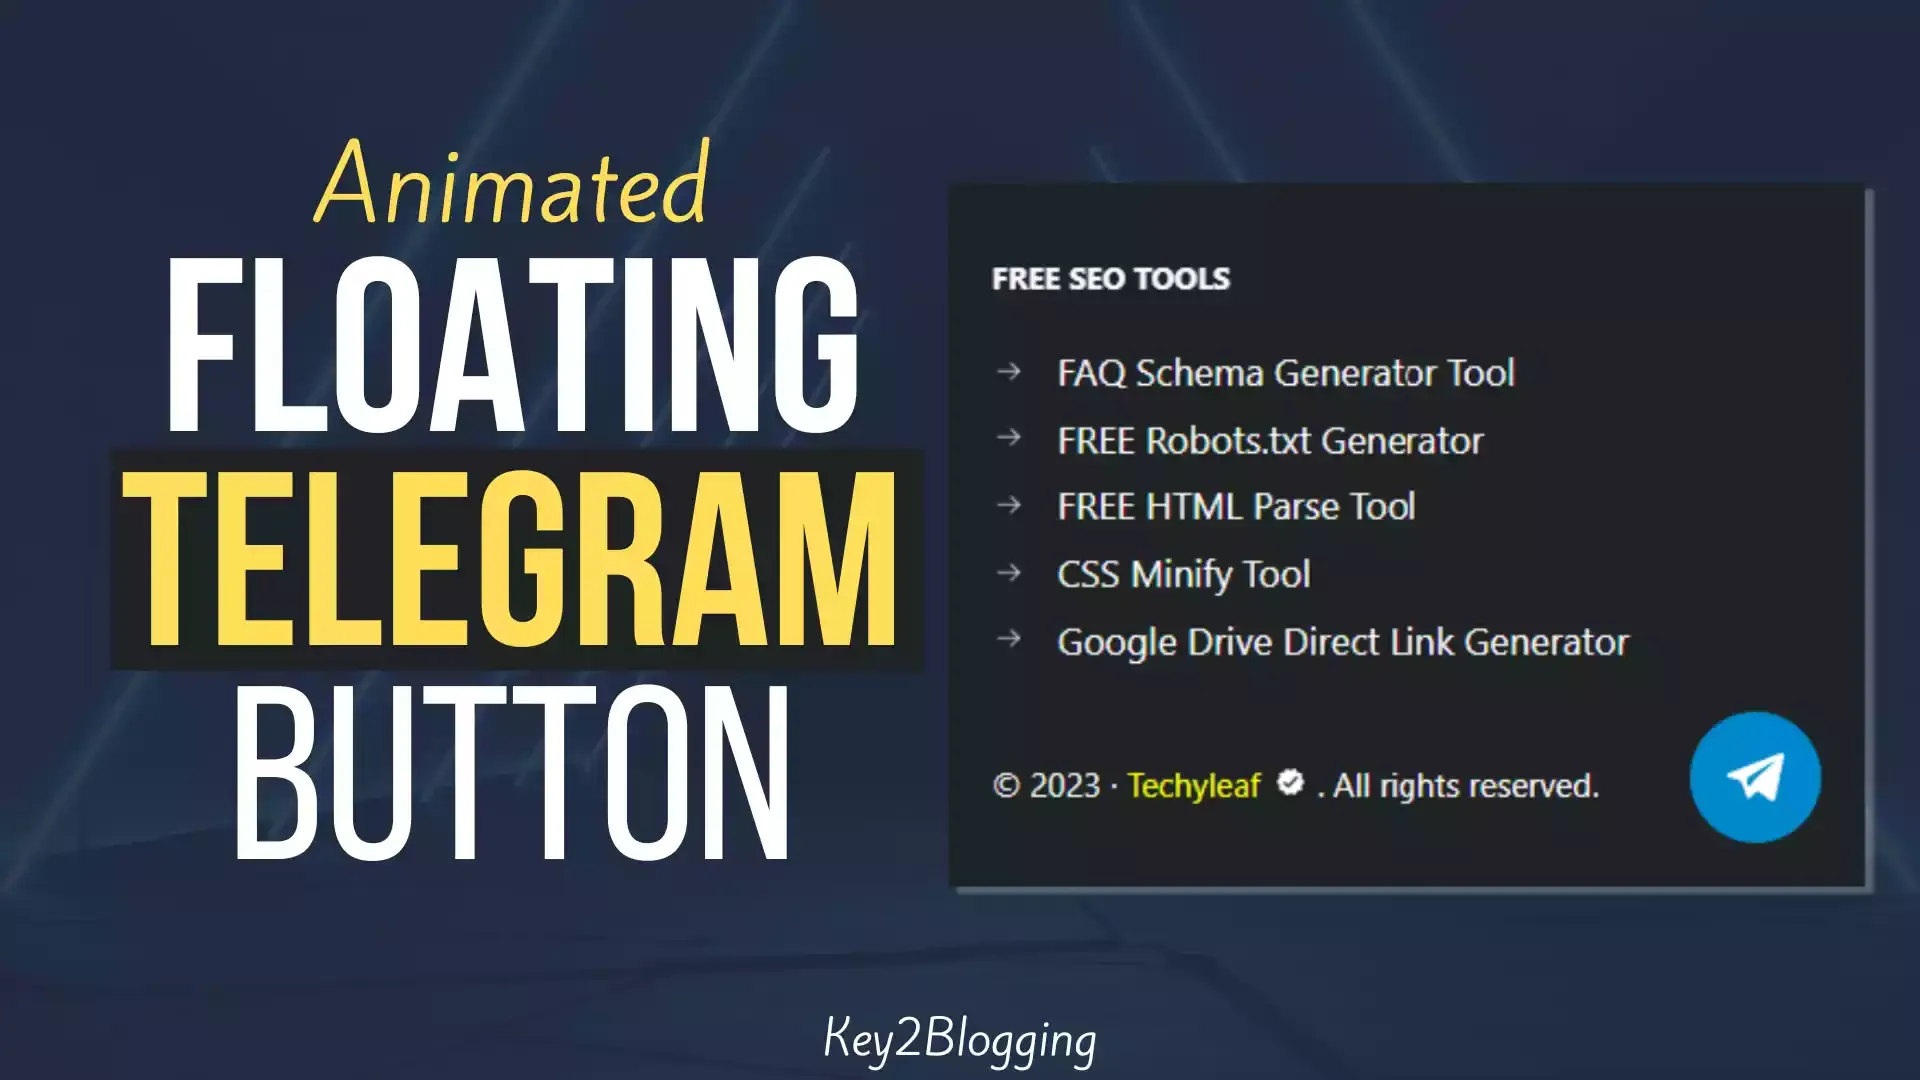 How to Add an Animated Floating Telegram Button In Blogger & WordPress